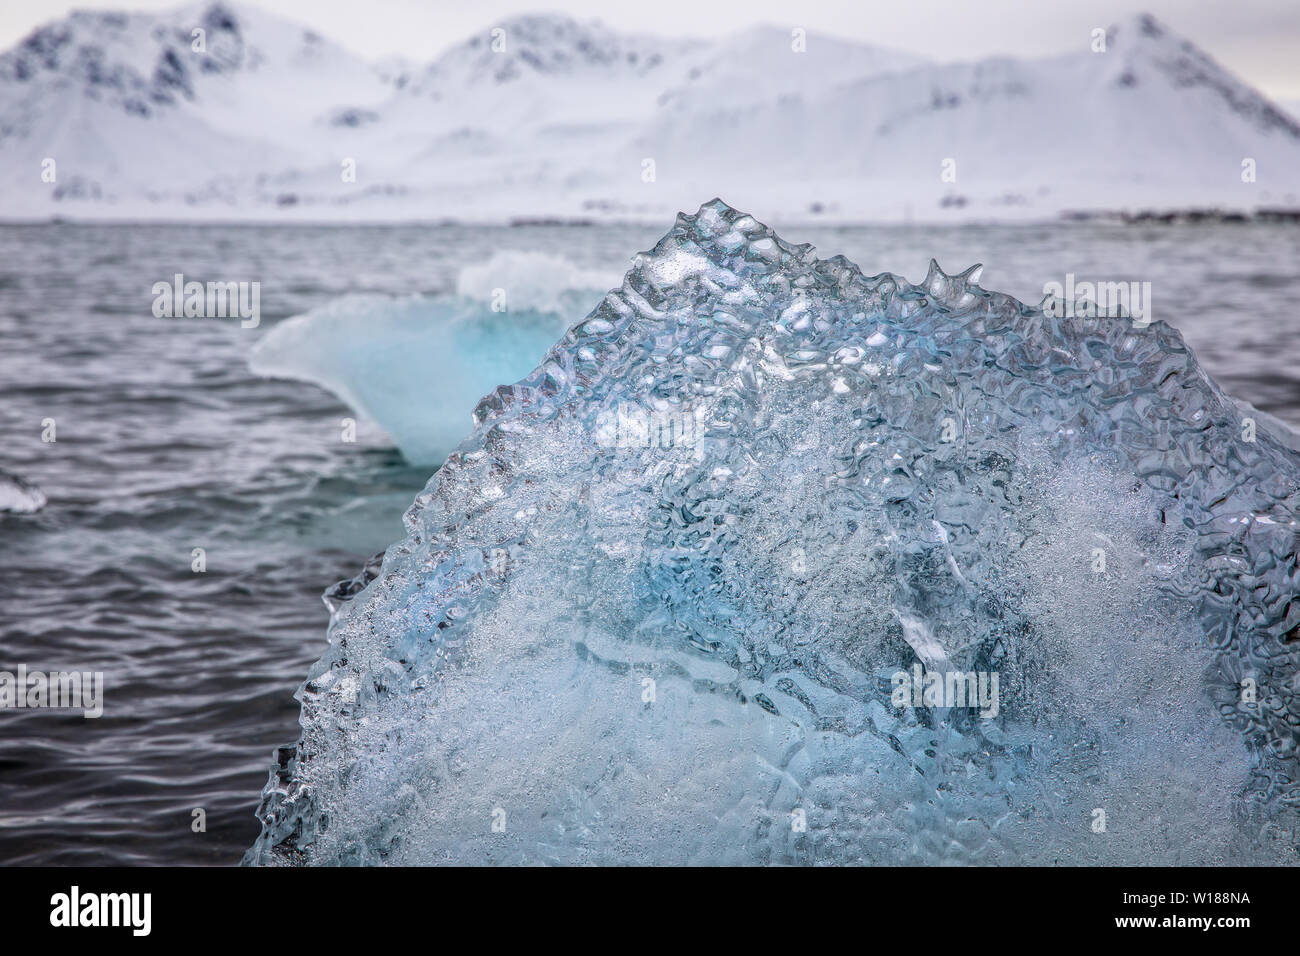 Details of iceberg fragments floating in the arctic sea. Blue glacial ice calved from the g;aciers of Svalbard, a Norwegian archipelago between mainla Stock Photo